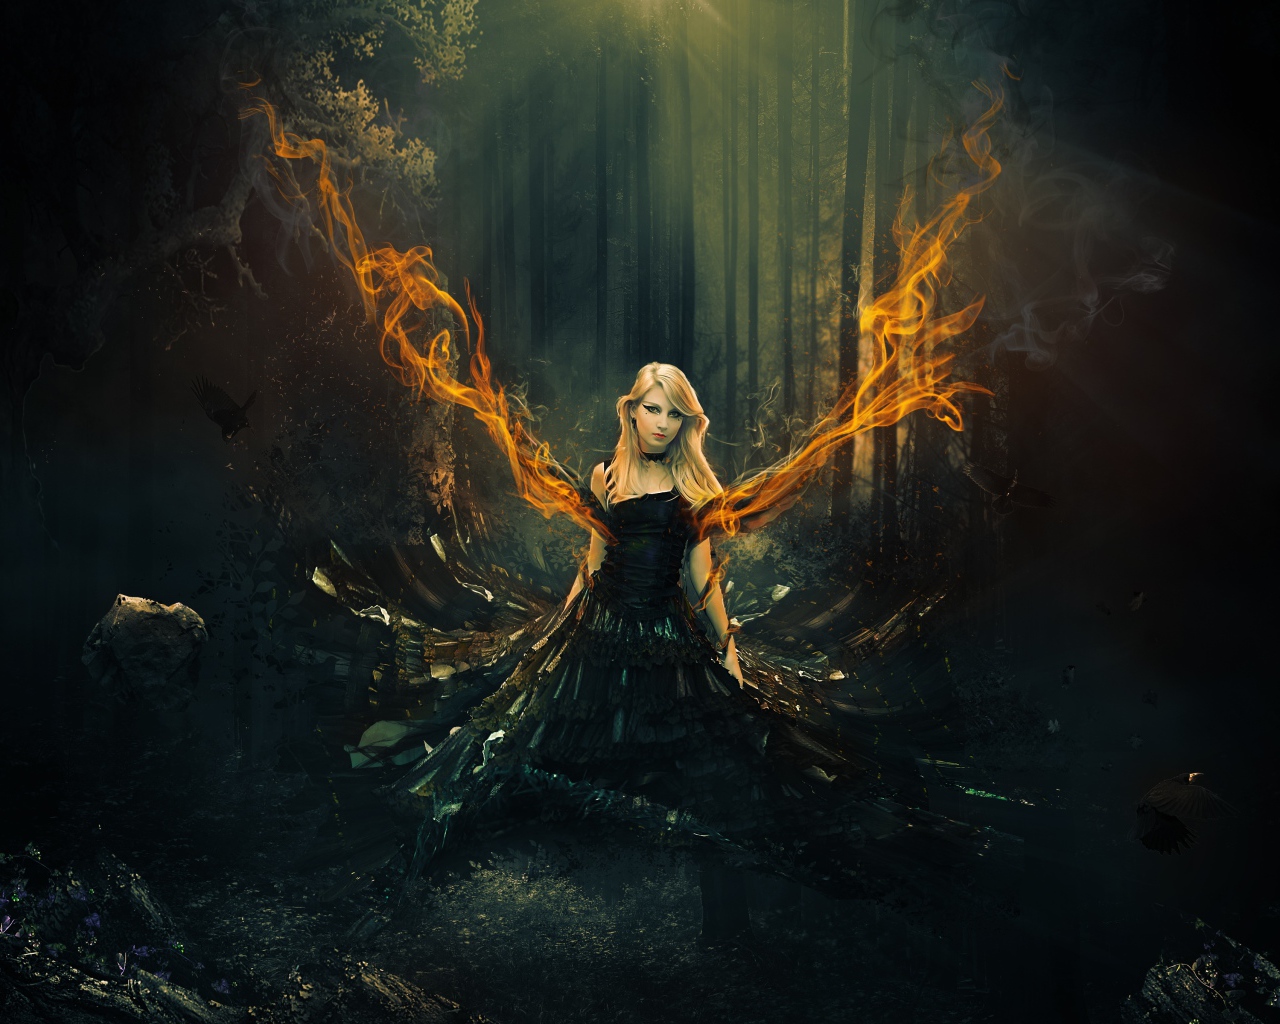 Fantastic Girl In A Black Dress With Fiery Wings Desktop Images, Photos, Reviews